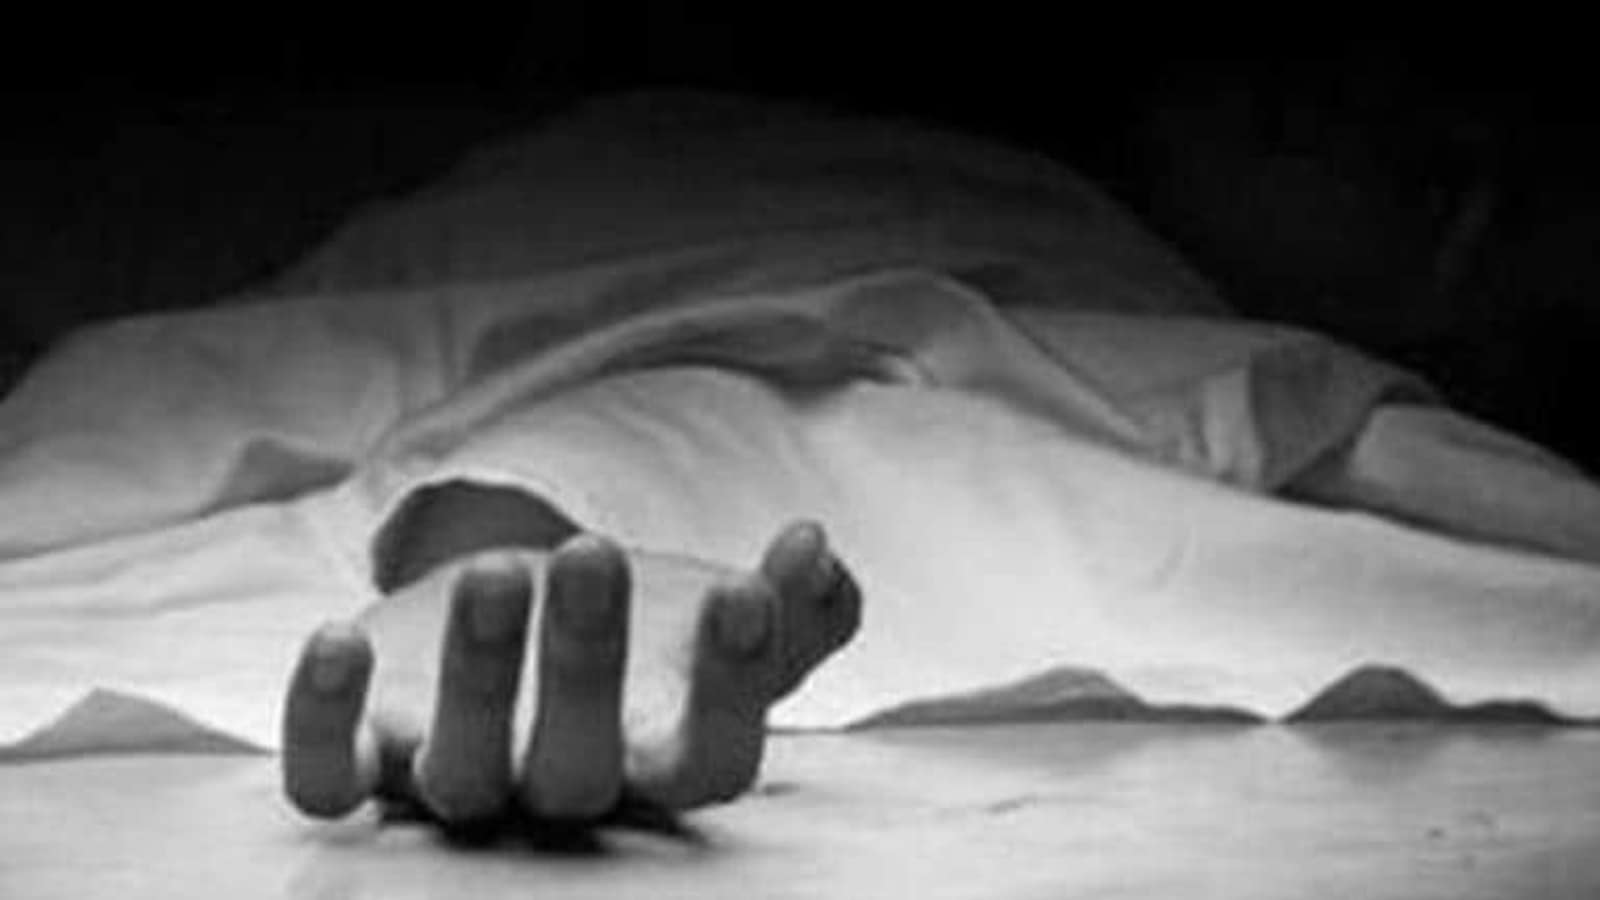 75-year-old woman found dead inside factory in Jaipur - Hindustan ...